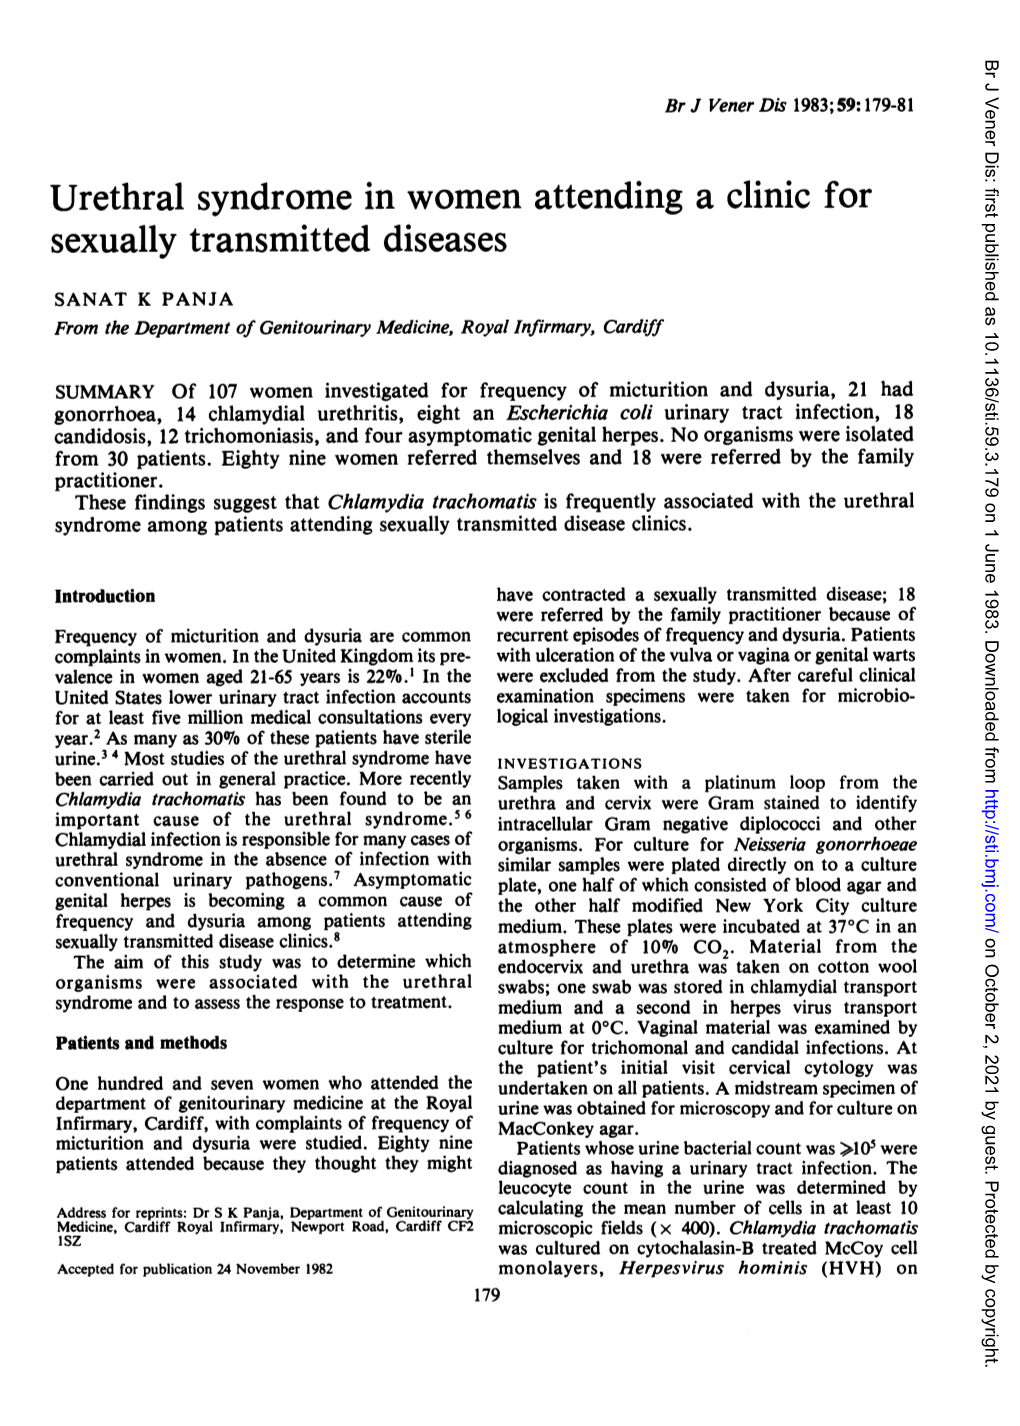 Urethral Syndrome in Women Attending a Clinic for Sexually Transmitted Diseases